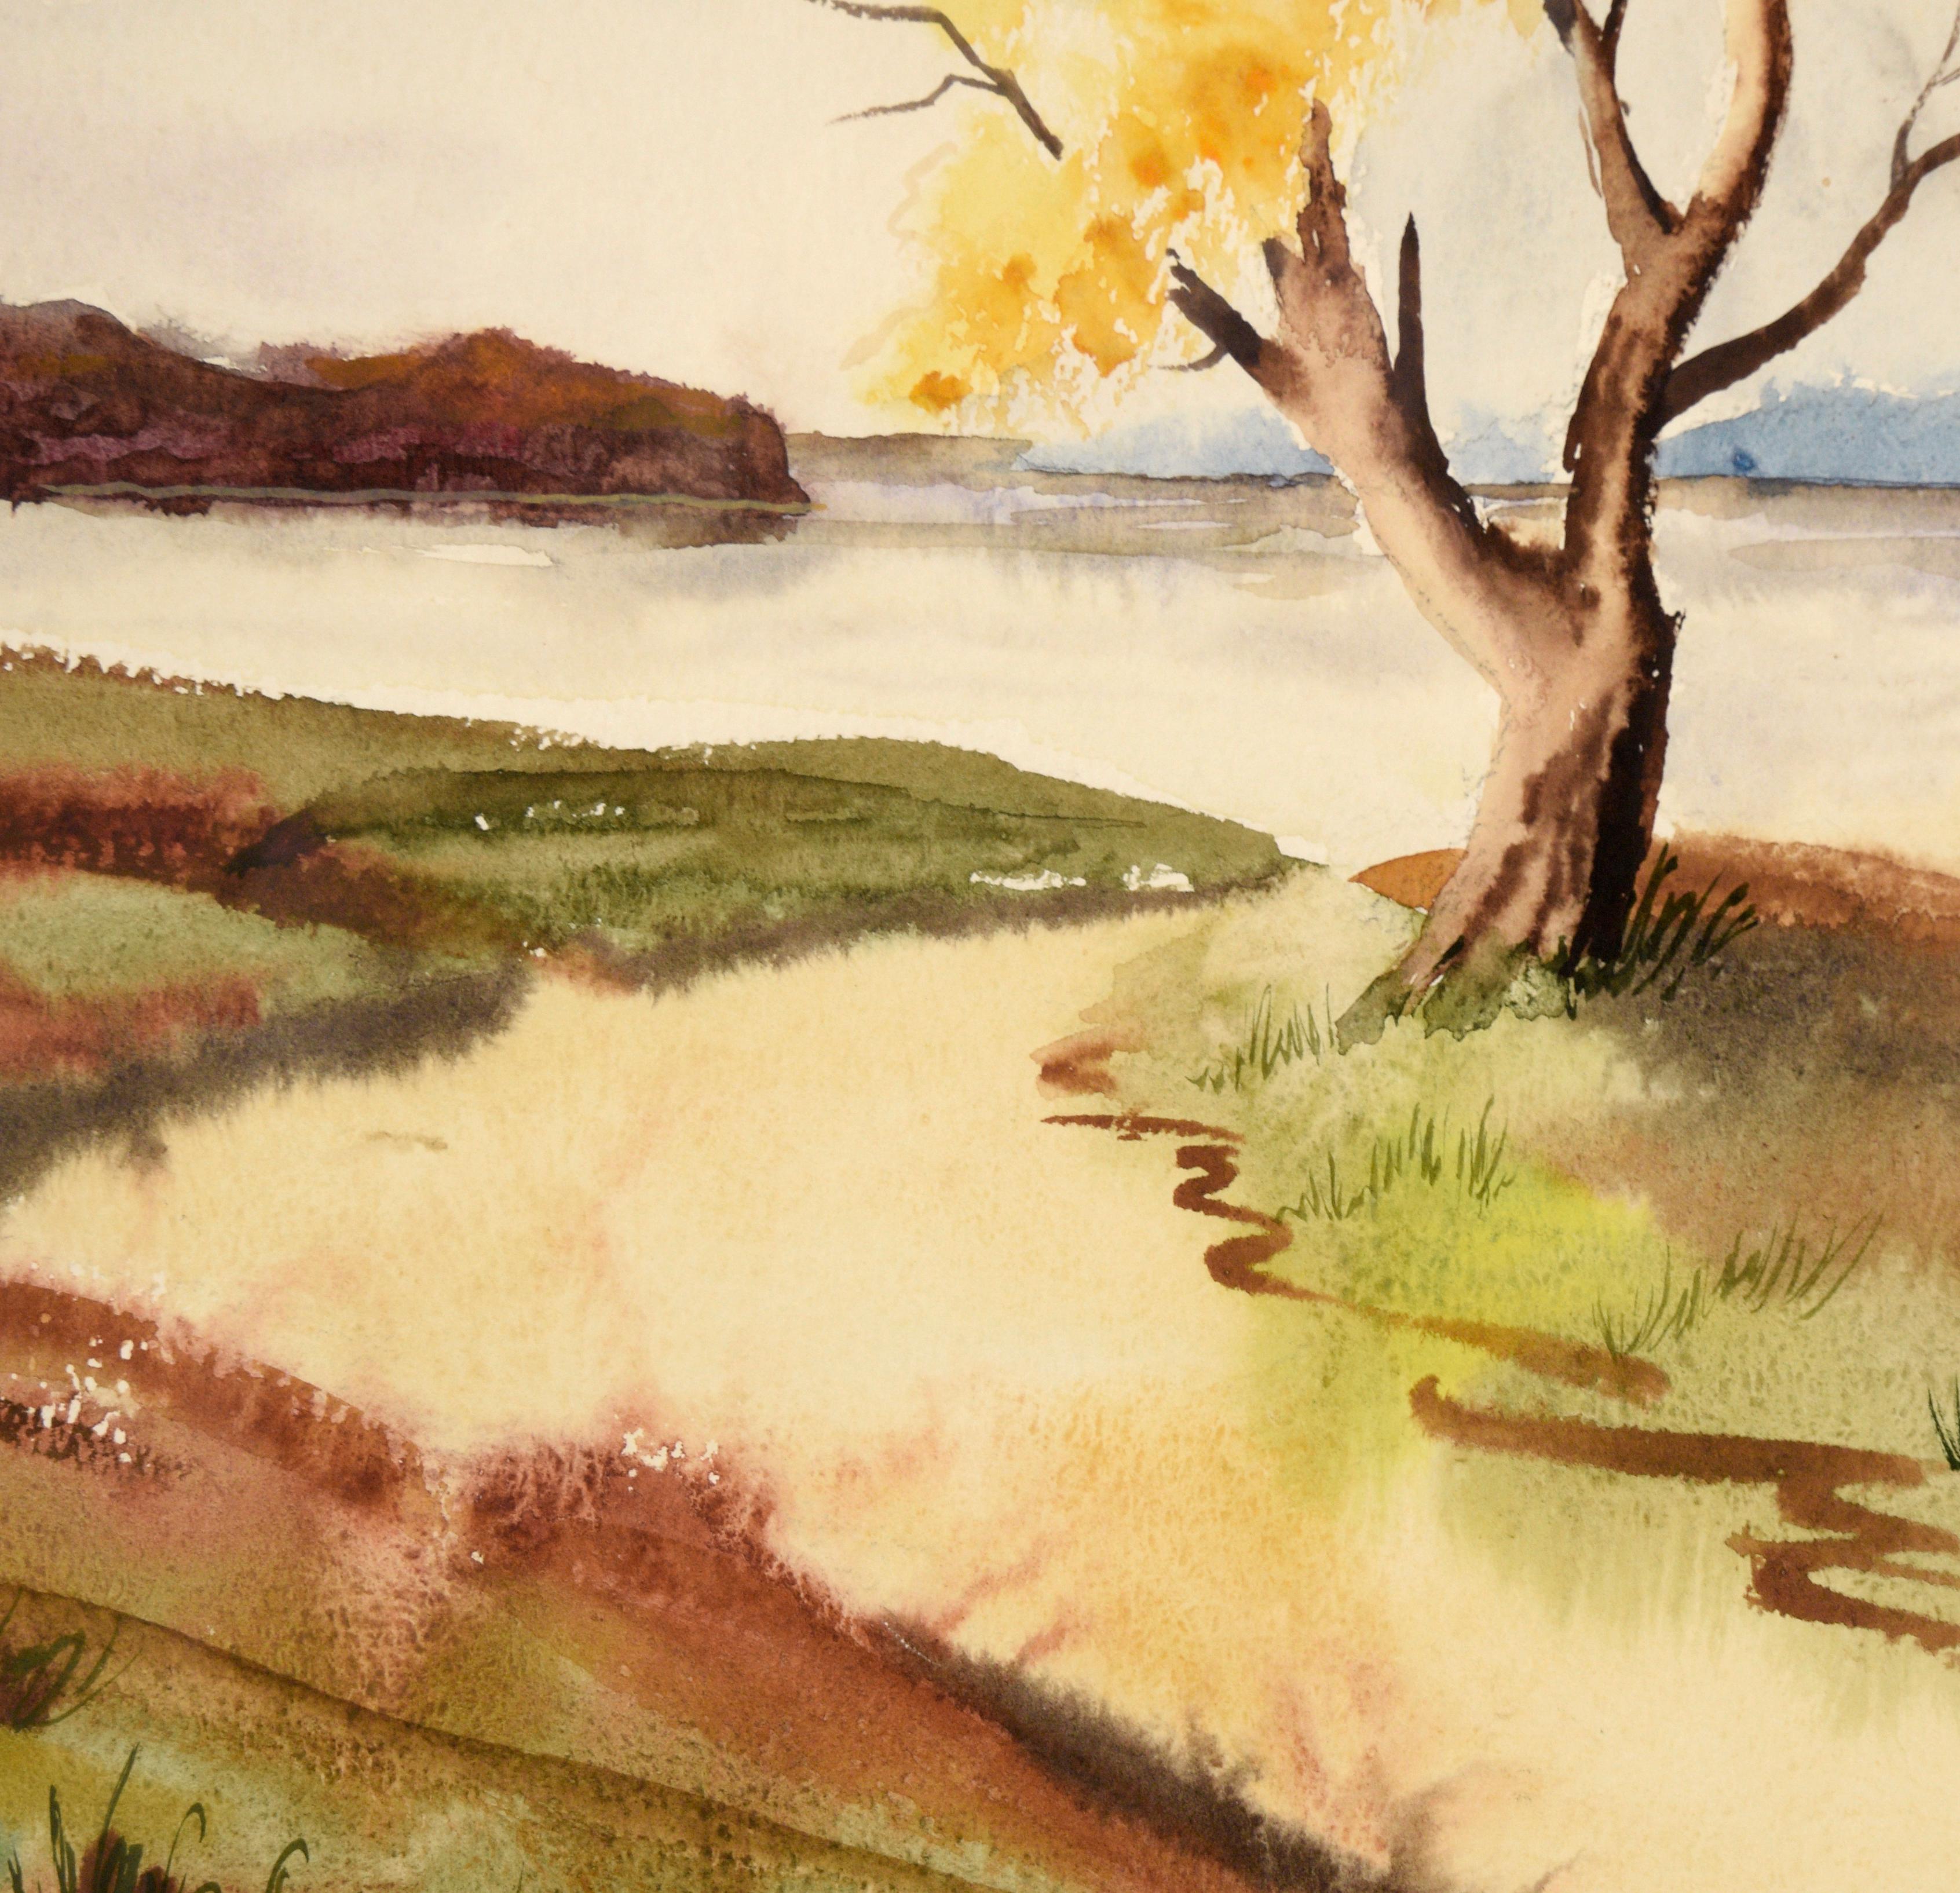 Serene watercolor by California artist Edna Lewis (nee Sutherland) (1905-1975). The viewer looks our over an inlet to a lake or bay, with mountain ranges in the distance. Two trees with bright yellow leaves sit at the shore of the water. The sky is